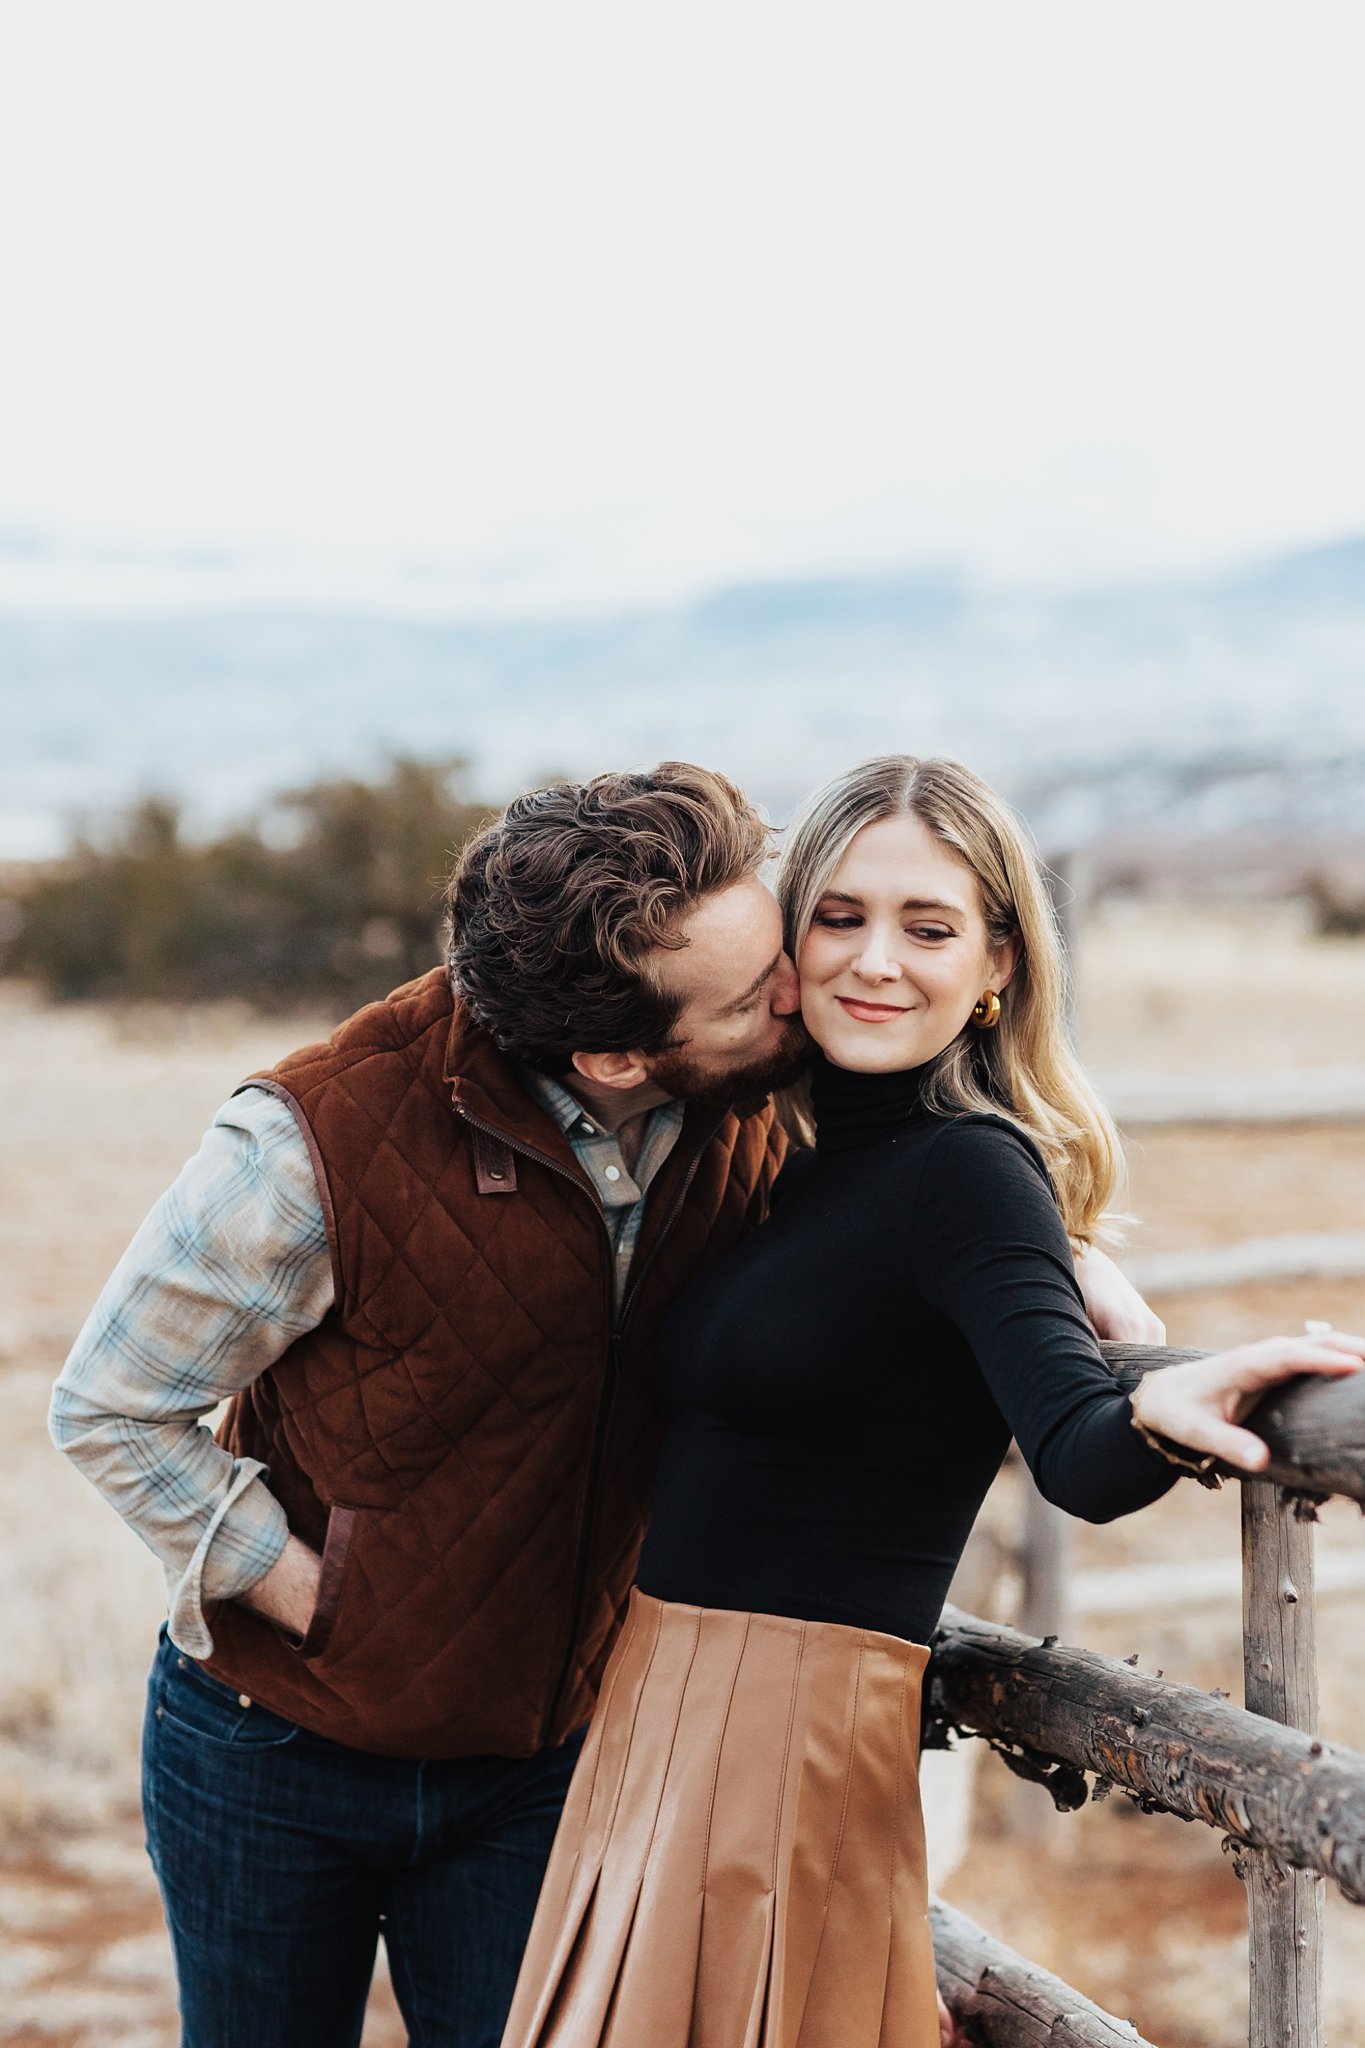 Alicia+lucia+photography+-+albuquerque+wedding+photographer+-+santa+fe+wedding+photography+-+new+mexico+wedding+photographer+-+new+mexico+wedding+-+southwest+engagement+-+ghost+ranch+engagement+-+ghost+ranch+wedding_0076.jpg